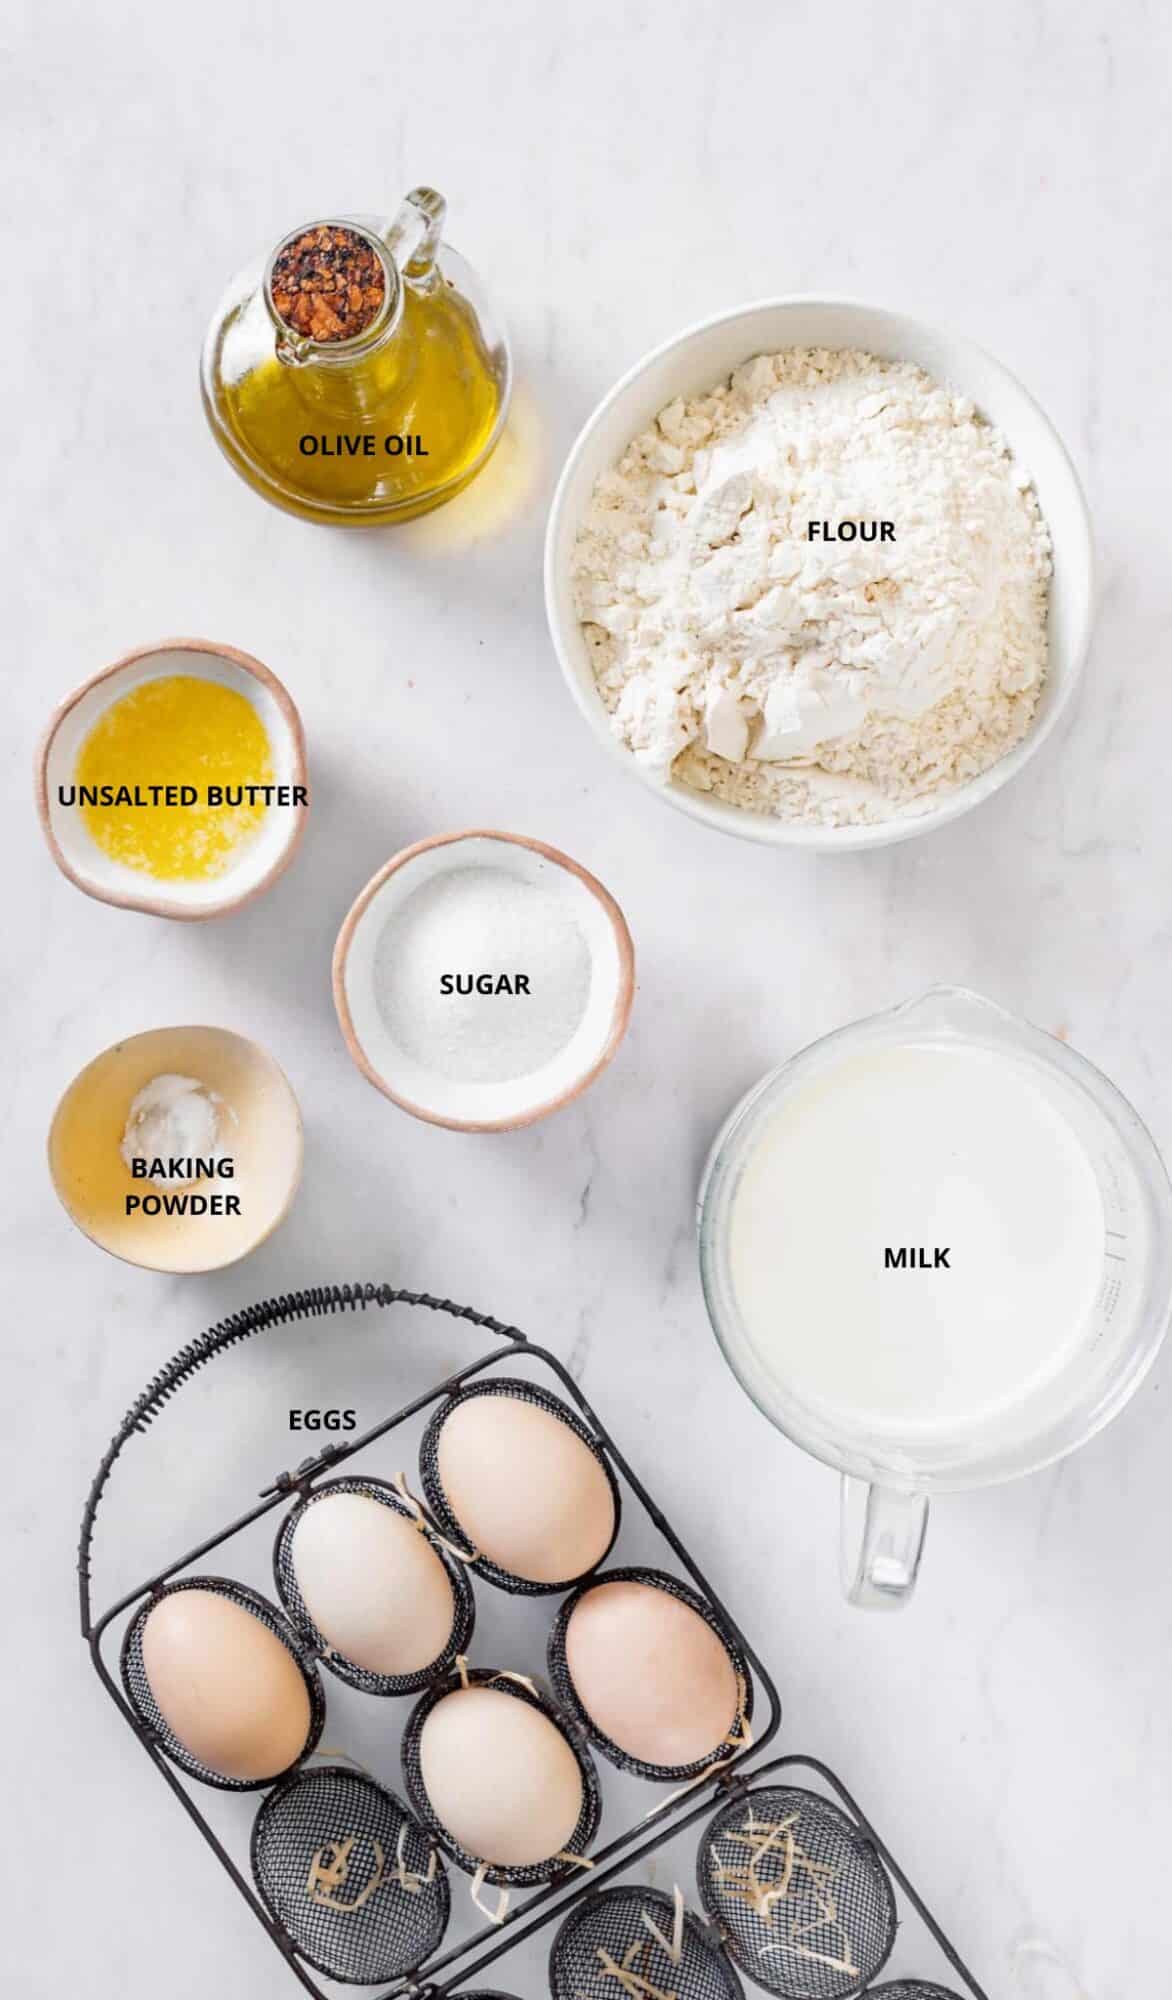 basic crepe recipe ingredients six large eggs bowl of flour four cups of milk olive oil bottle baking powder white sugar in a bowl and melted unsalted butter.